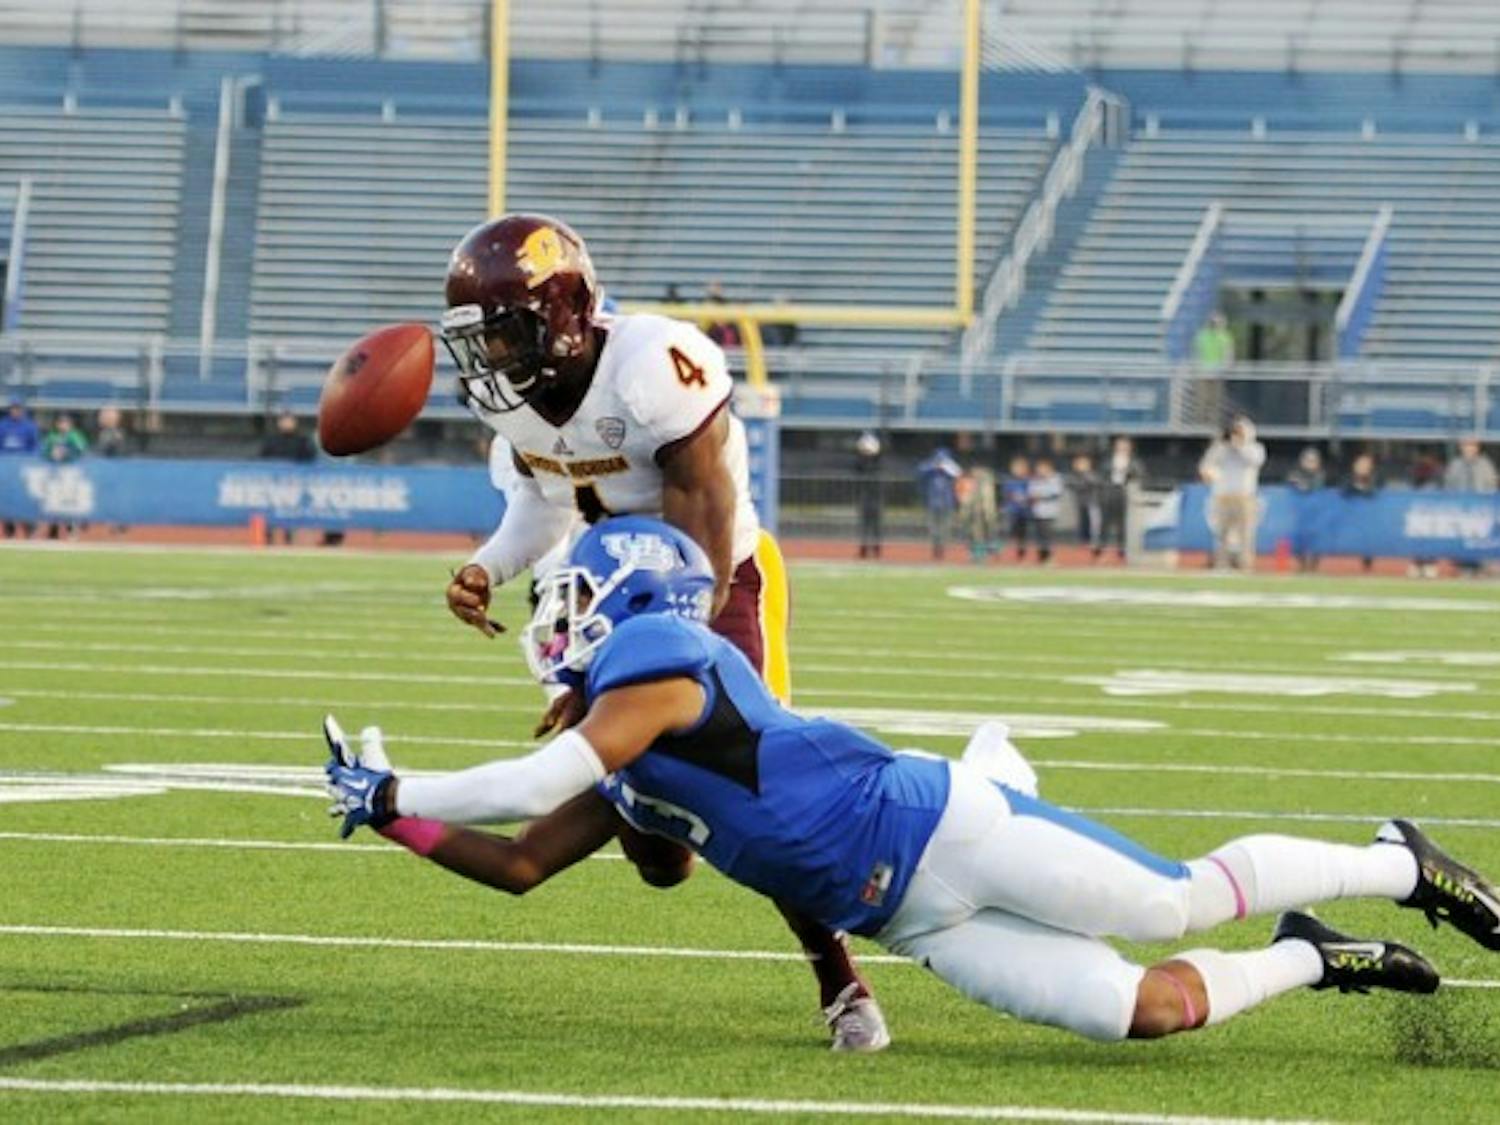 Senior wide receiver Devon Hughes dives for junior quarterback Joe Licata&rsquo;s pass during Buffalo&#39;s game against Central Michigan Saturday. Licata was picked off at the 2-yard line by Central Michigan&rsquo;s Brandon Greer.&nbsp;Yusong Shi, The Spectrum